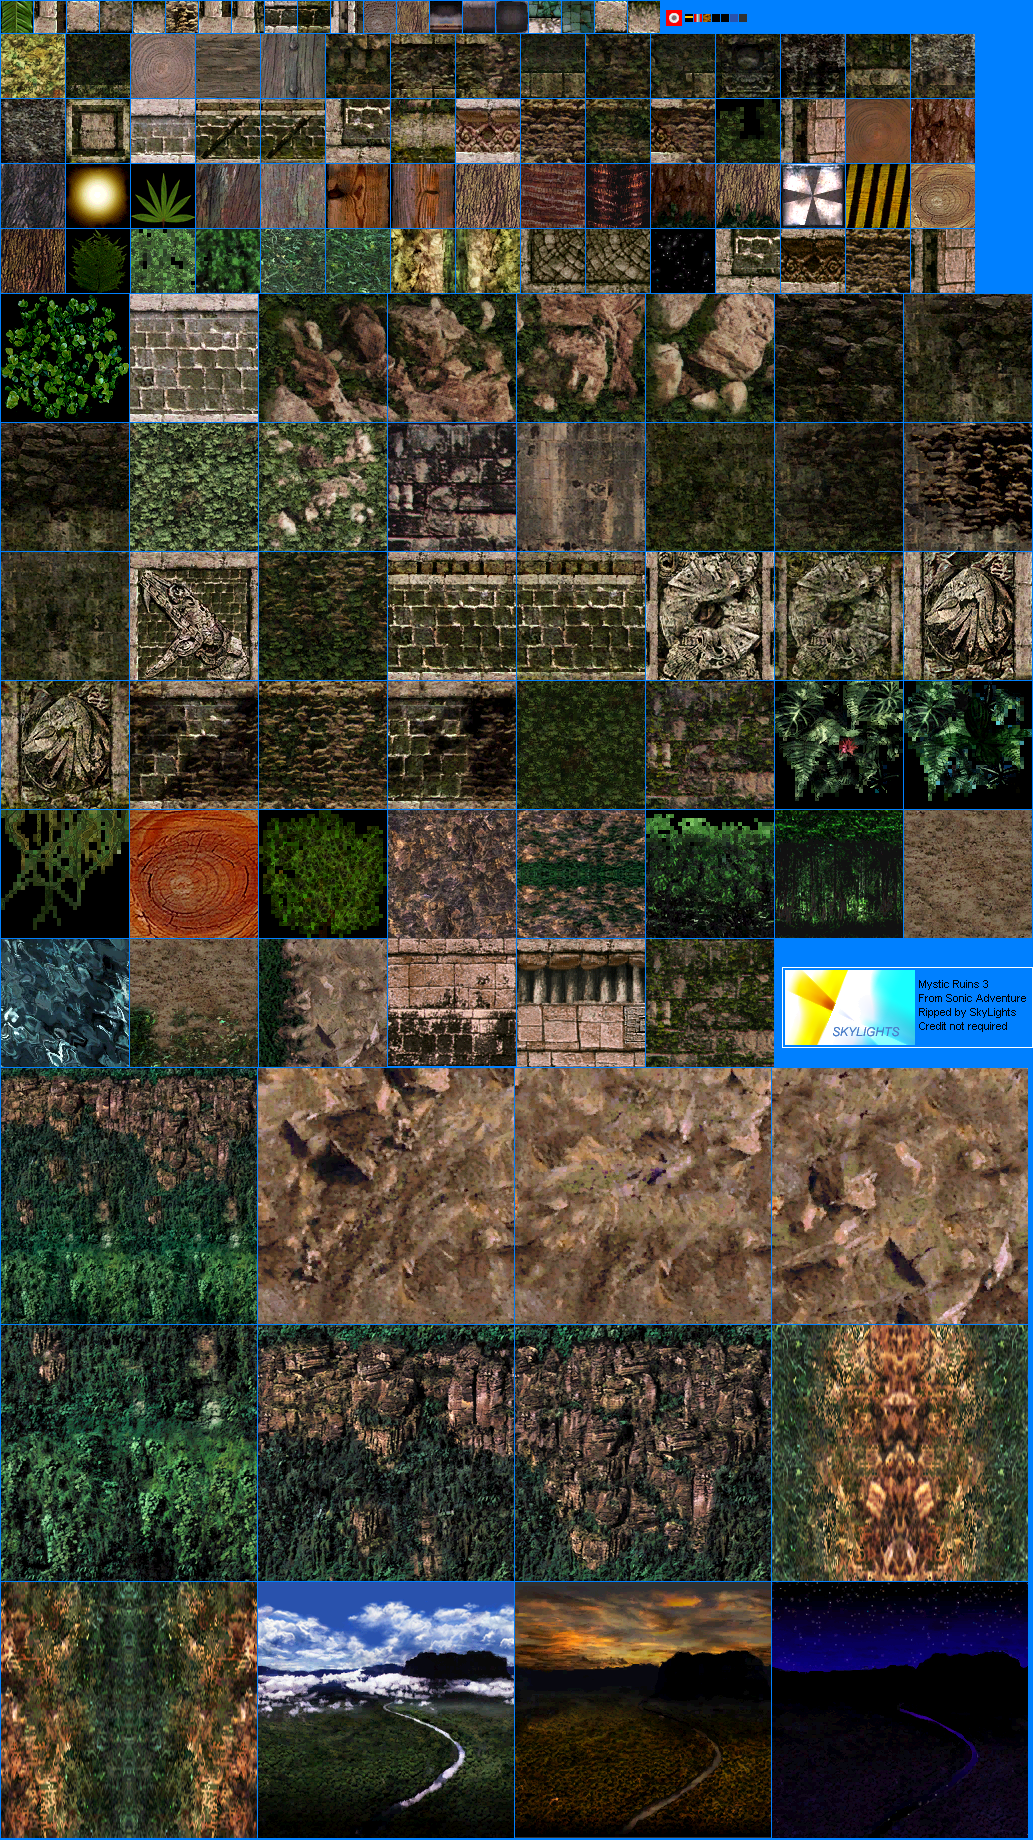 pc-computer-sonic-adventure-dx-director-s-cut-mystic-ruins-3-the-textures-resource